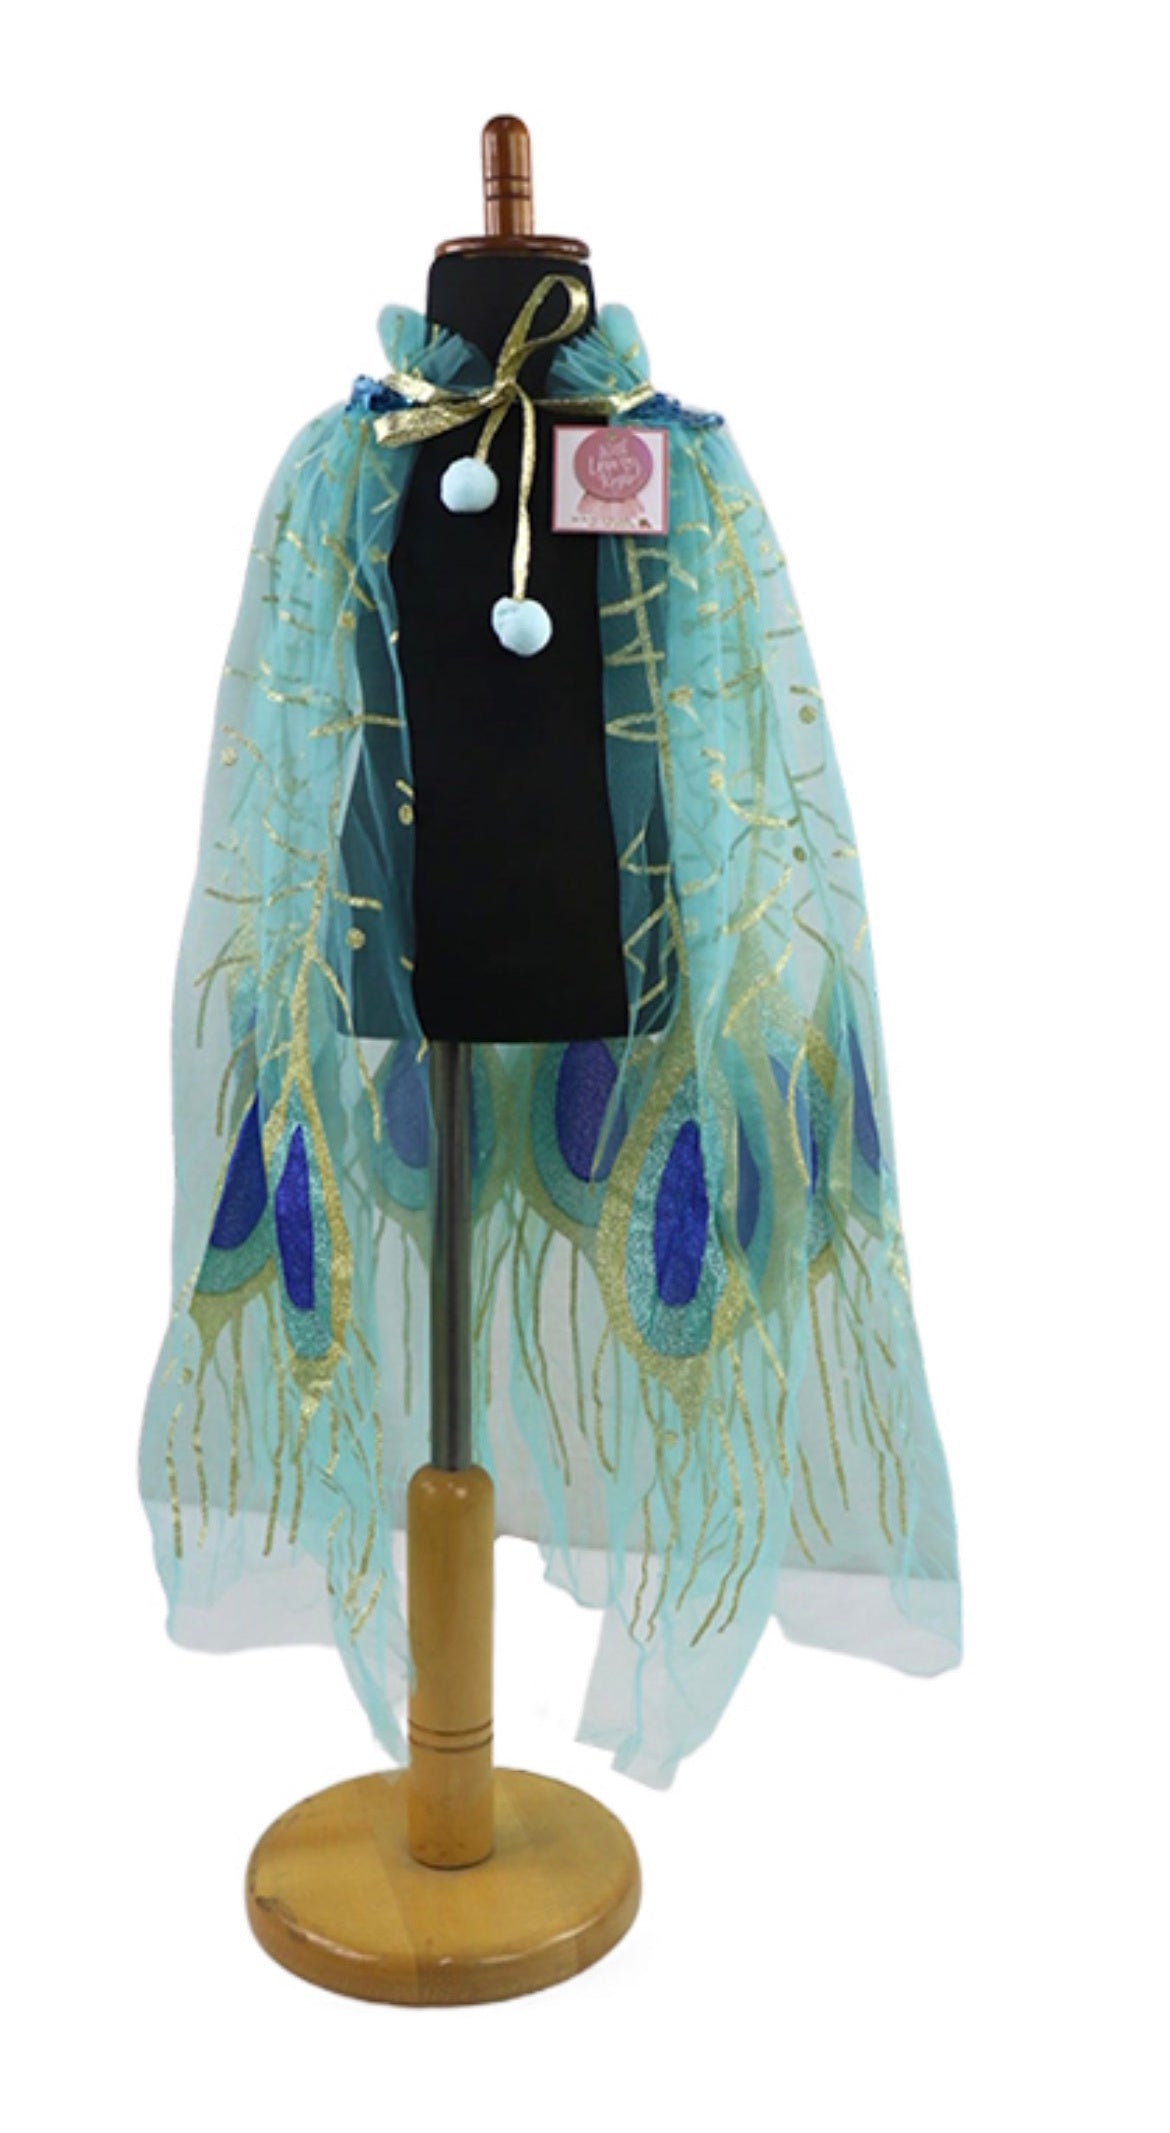 Girls Fun Theme Park Princess Capes - Turquoise Peacock Feathers - tulle cape - tie neck with soft bobbles